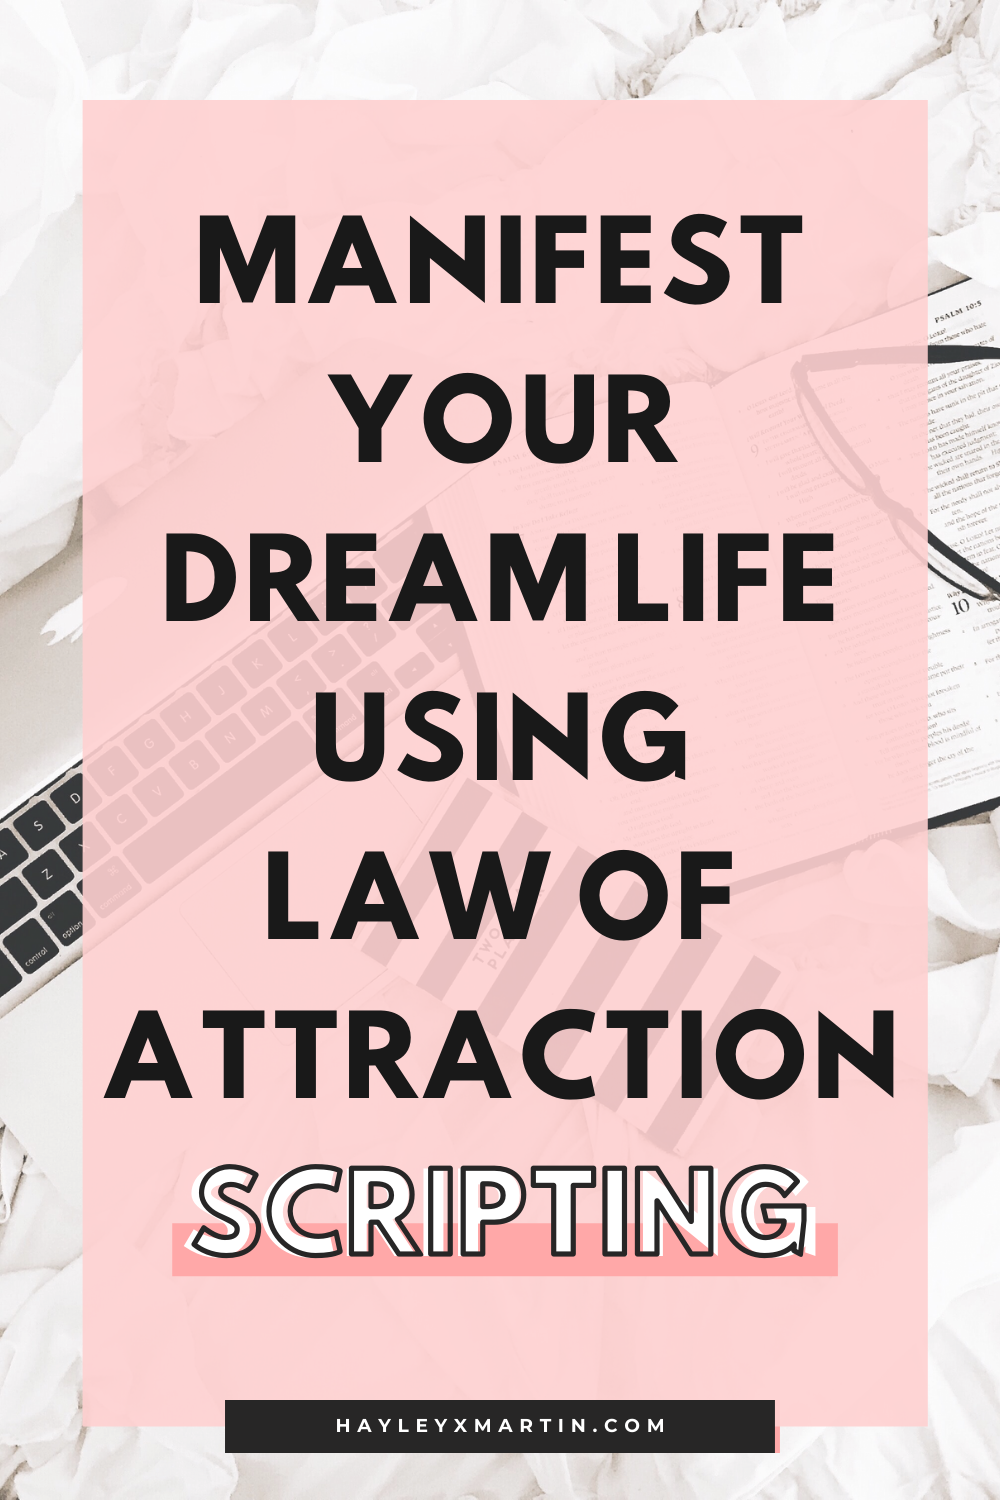 MANIFEST YOUR DREAM LIFE USING LAW OF ATTRACTION | HAYLEYXMARTIN